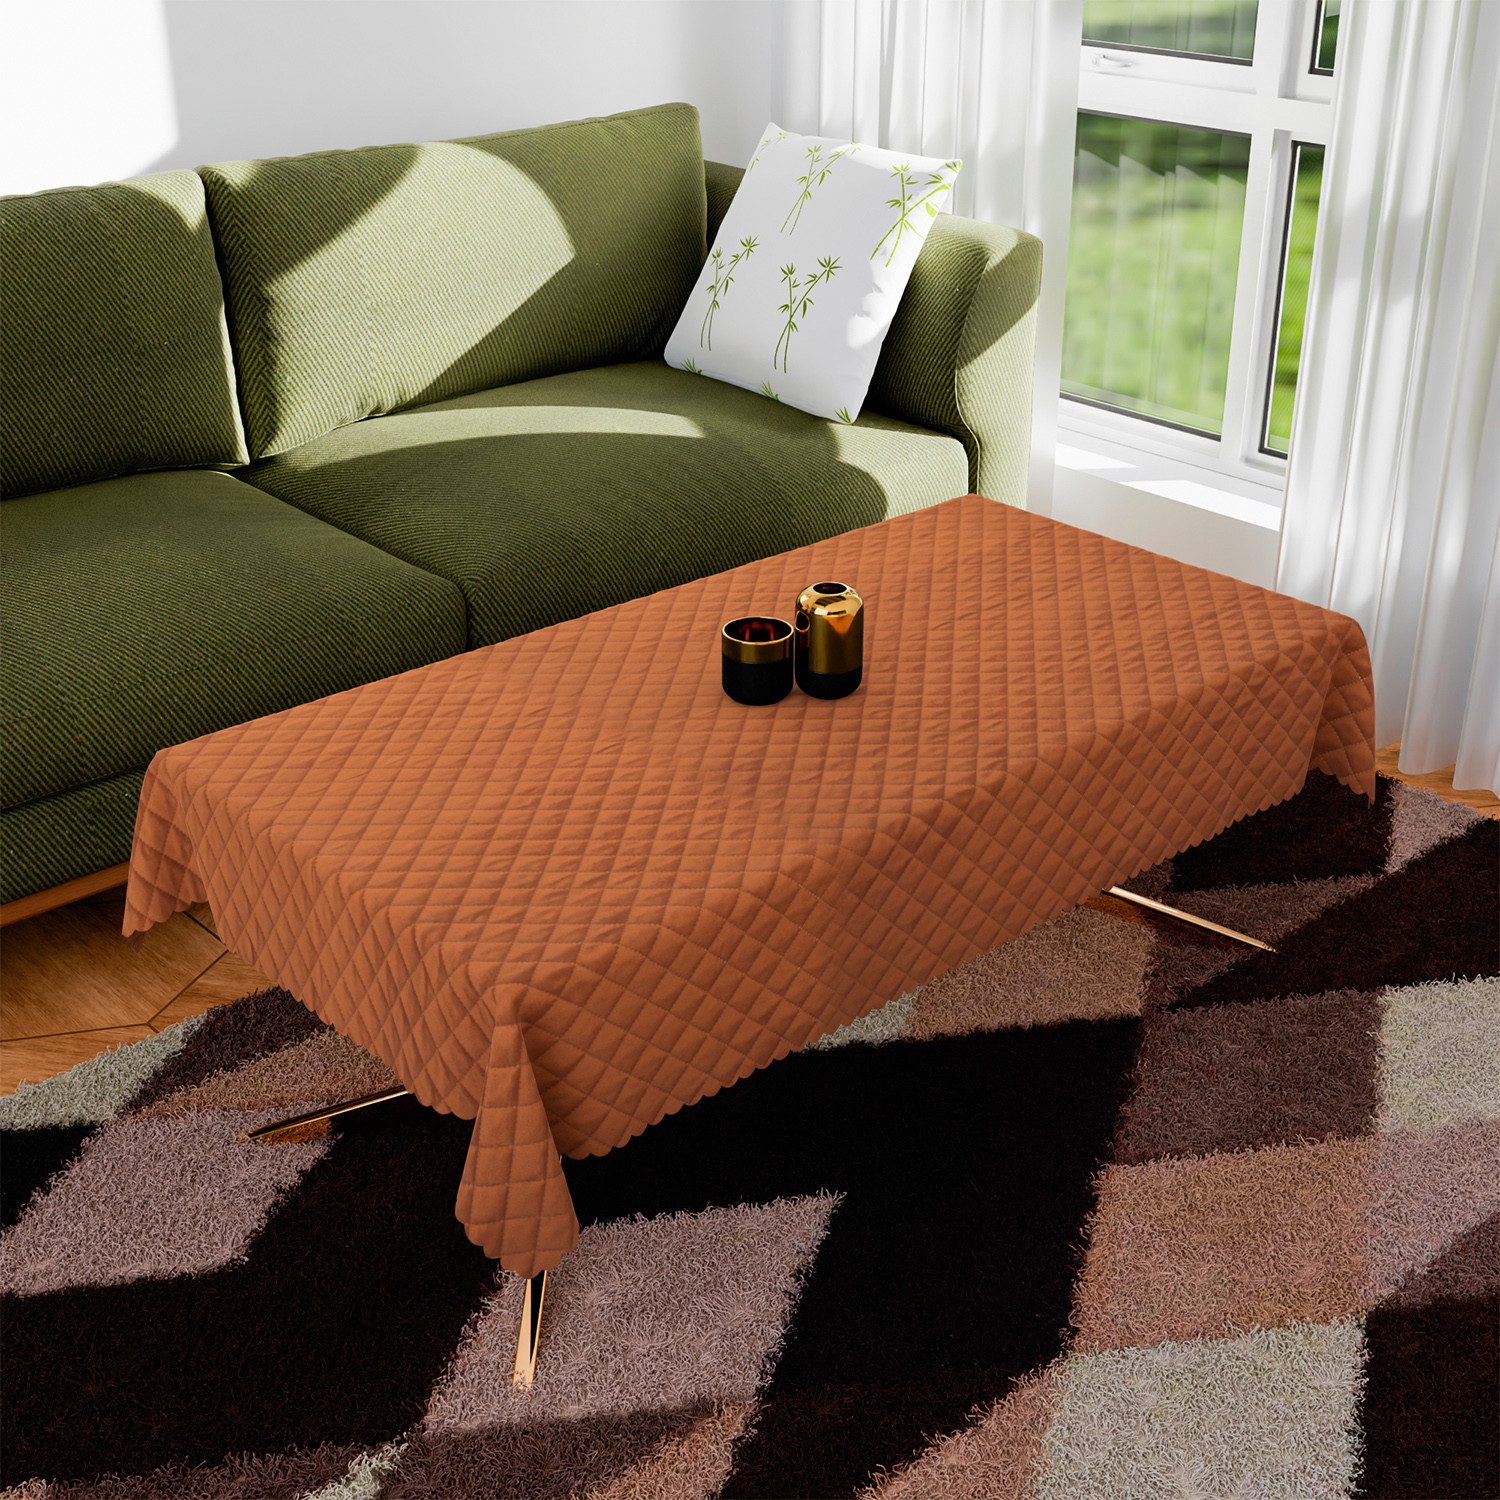 Kuber Industries Center Table Cover | Velvet Table Cover | Quilted Center Table Cover | Reusable Cloth Cover for Table Top | Table Protector Cover | 40x60 Inch | Brown